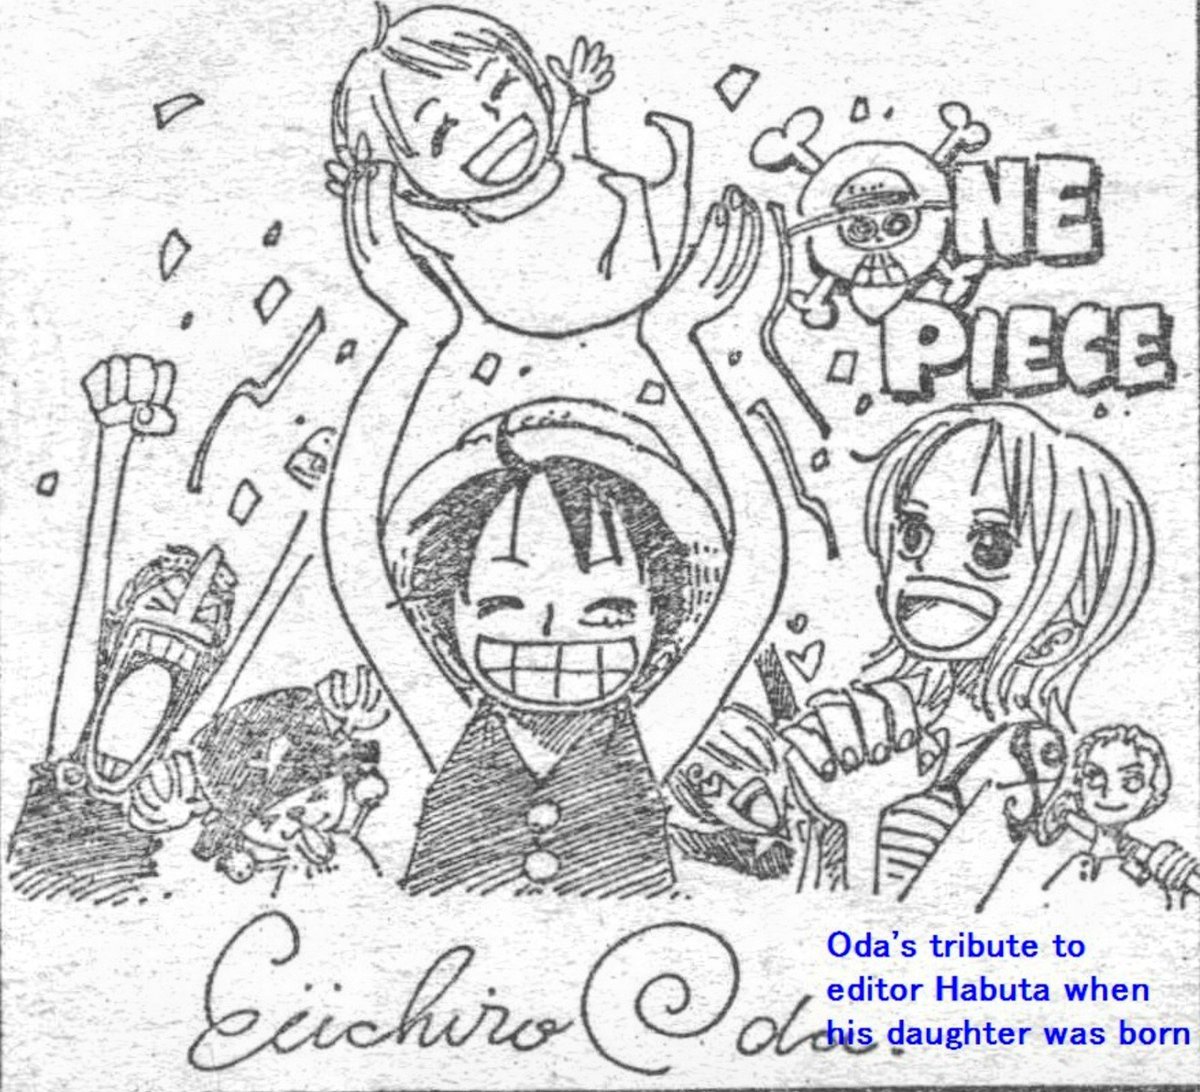 When Oda's former editor Habuta's daughter was born, Oda gave him a nice illustration to celebrate. Habuta recalled he appreciated it so much that it was the happiest moment ever since he became Shonen Jump editor.🥰